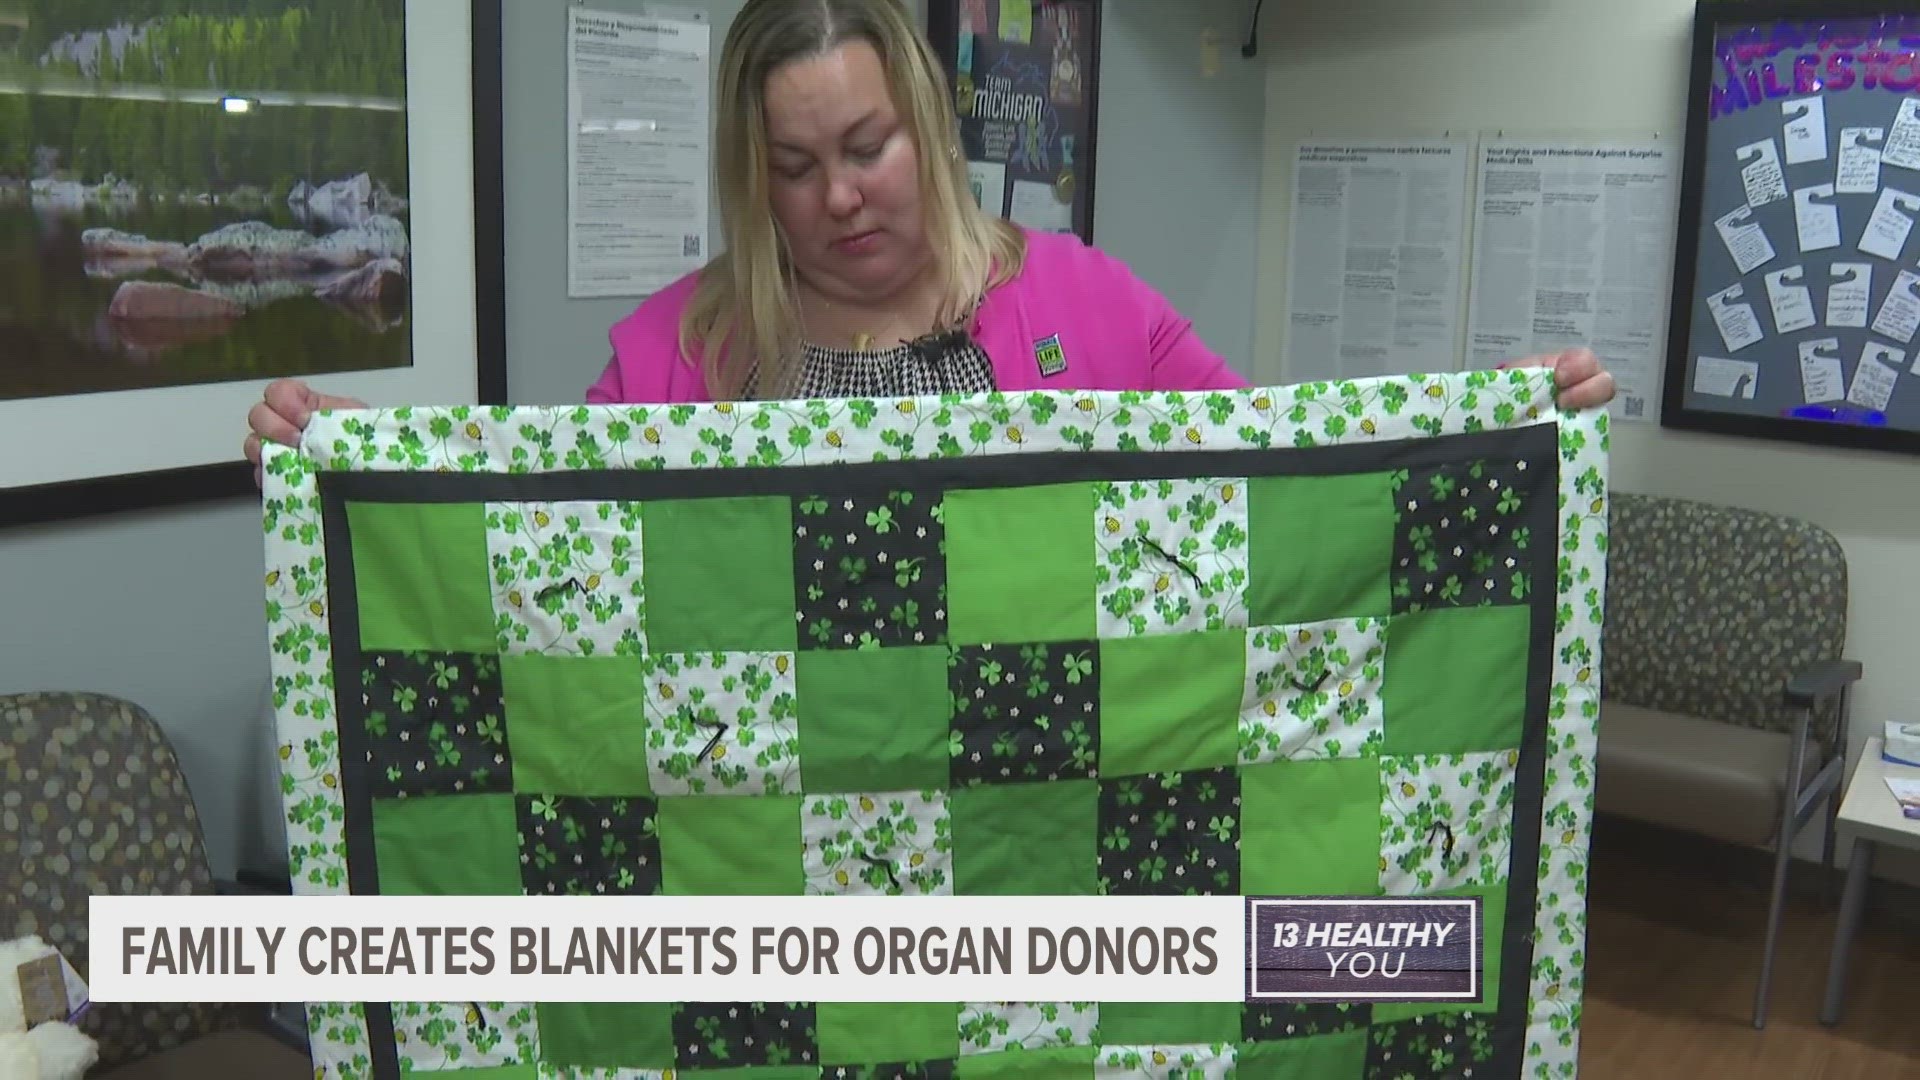 The Fiser family received their own comfort blanket when their father and husband, Scott, died and gave the gift of life to four others through organ donation.